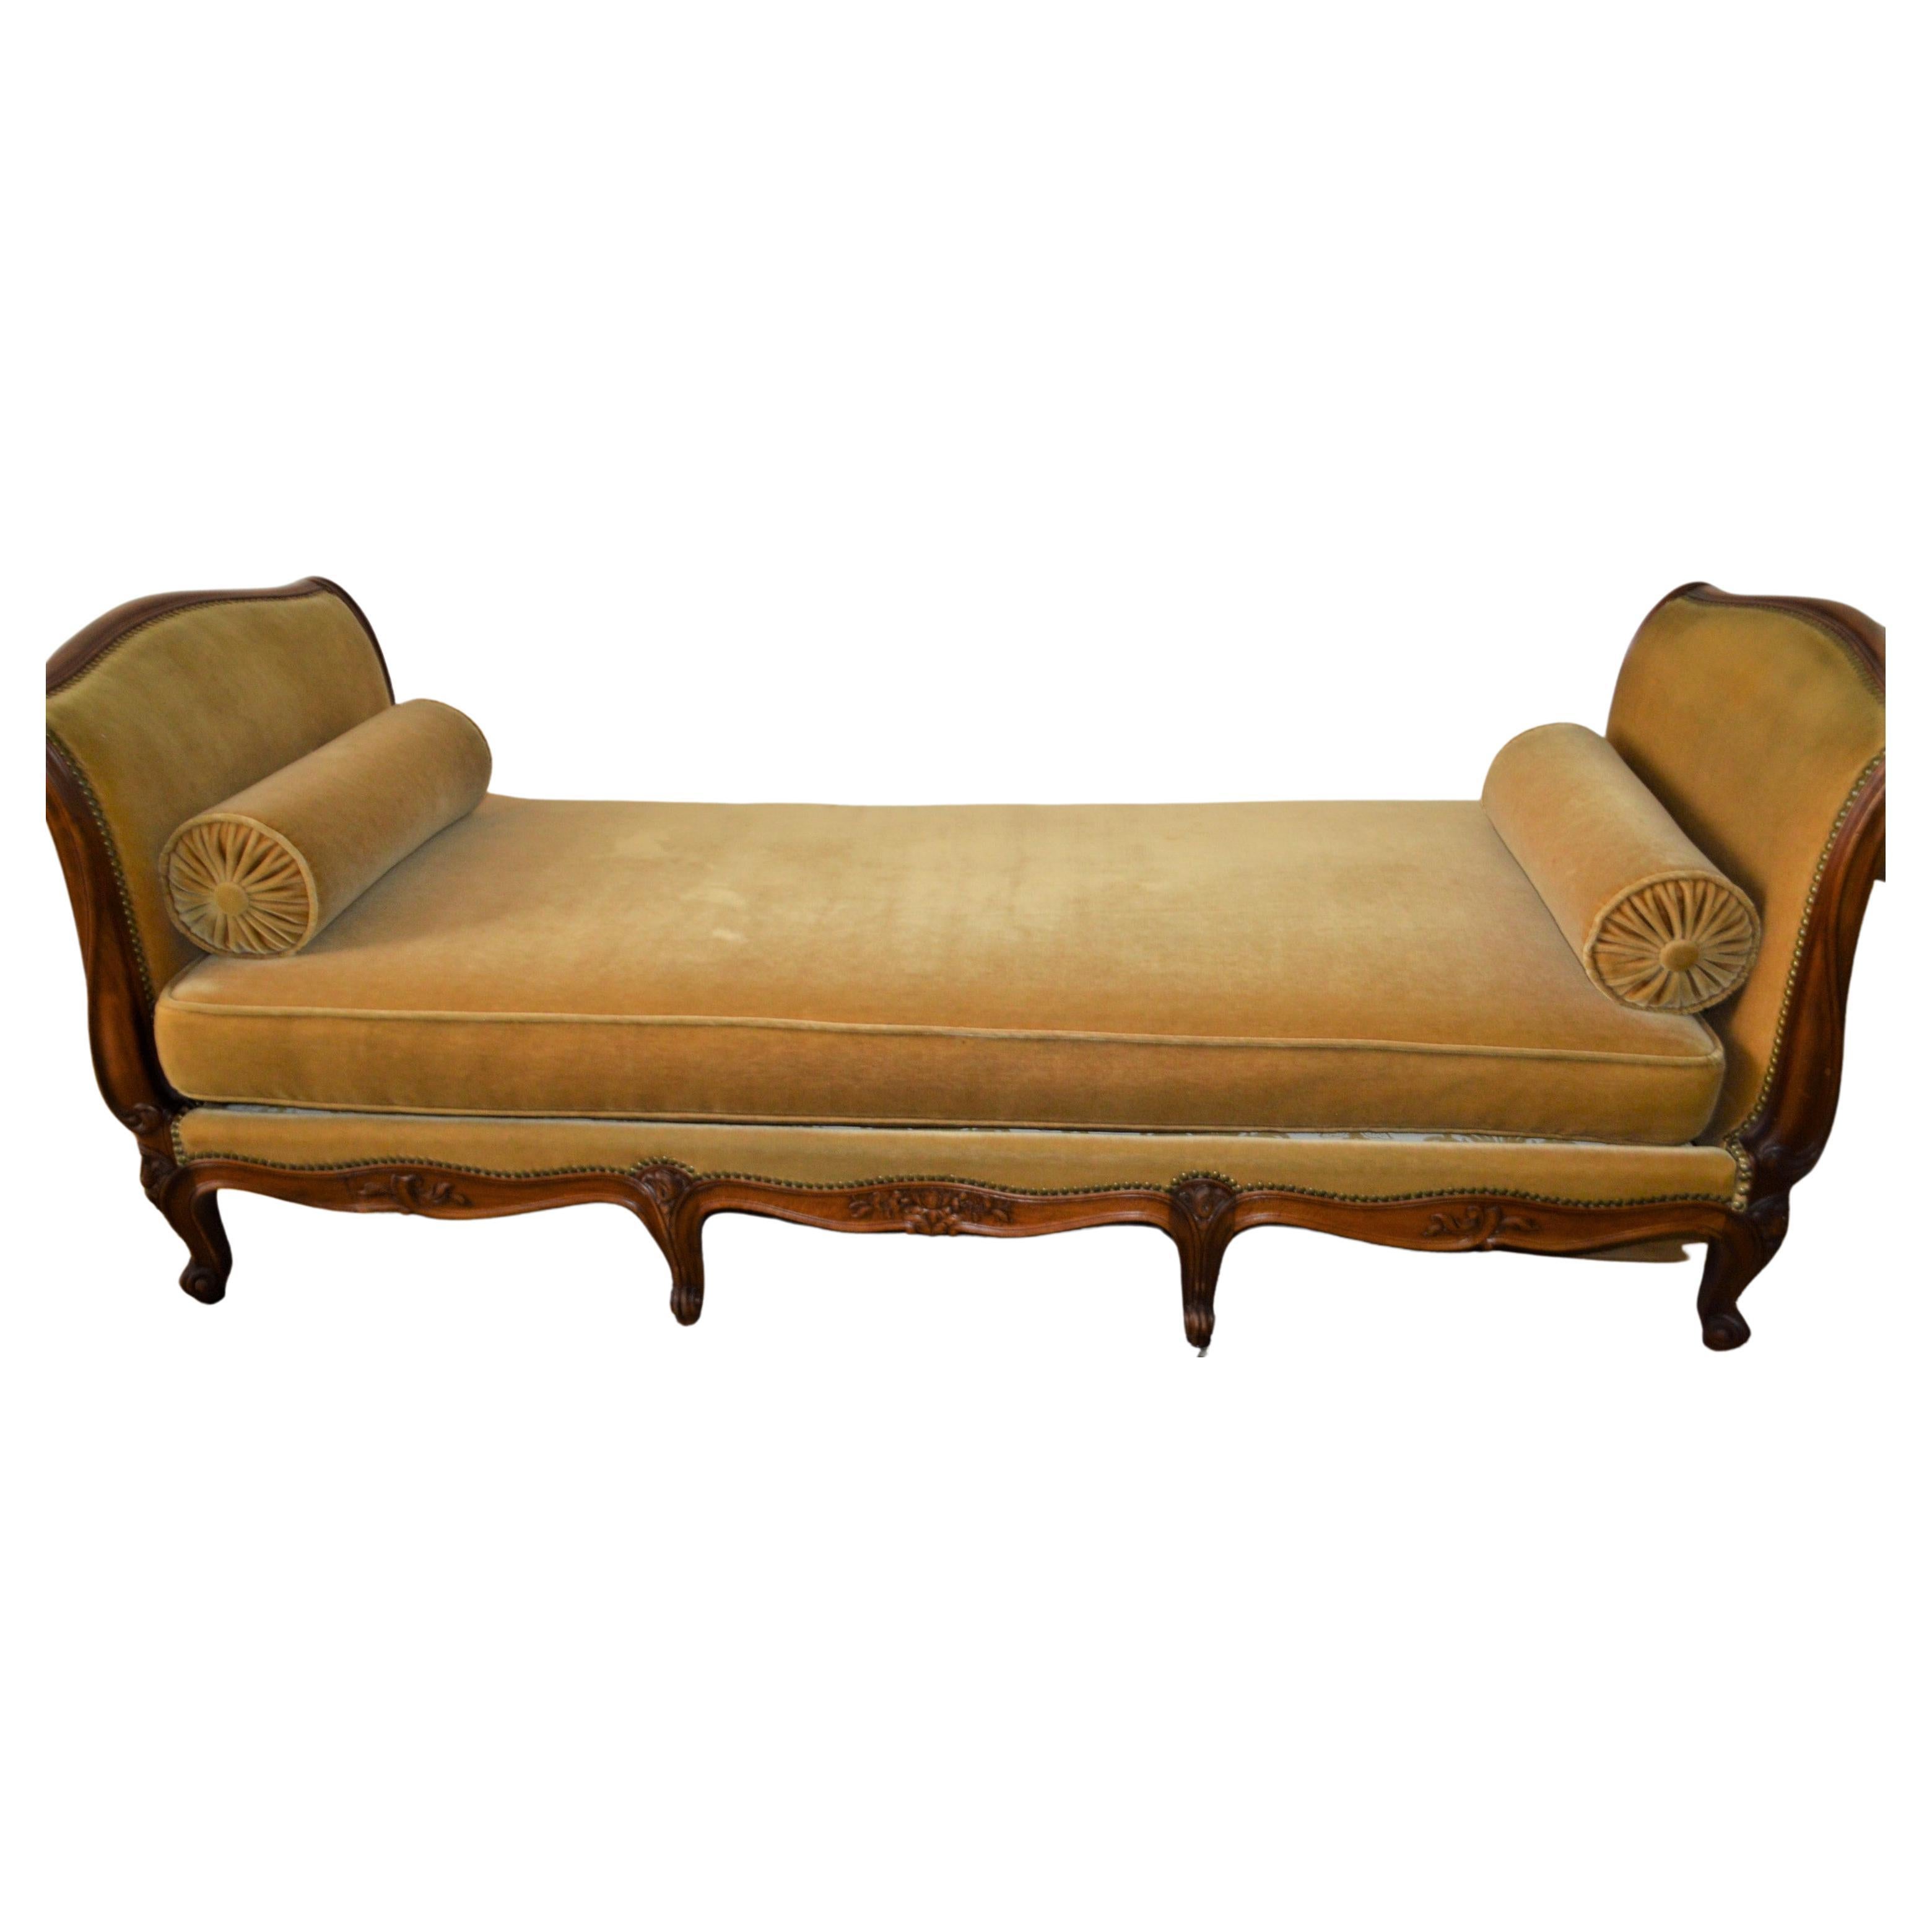  A Louis XV style walnut daybed having a length of 89 1/2